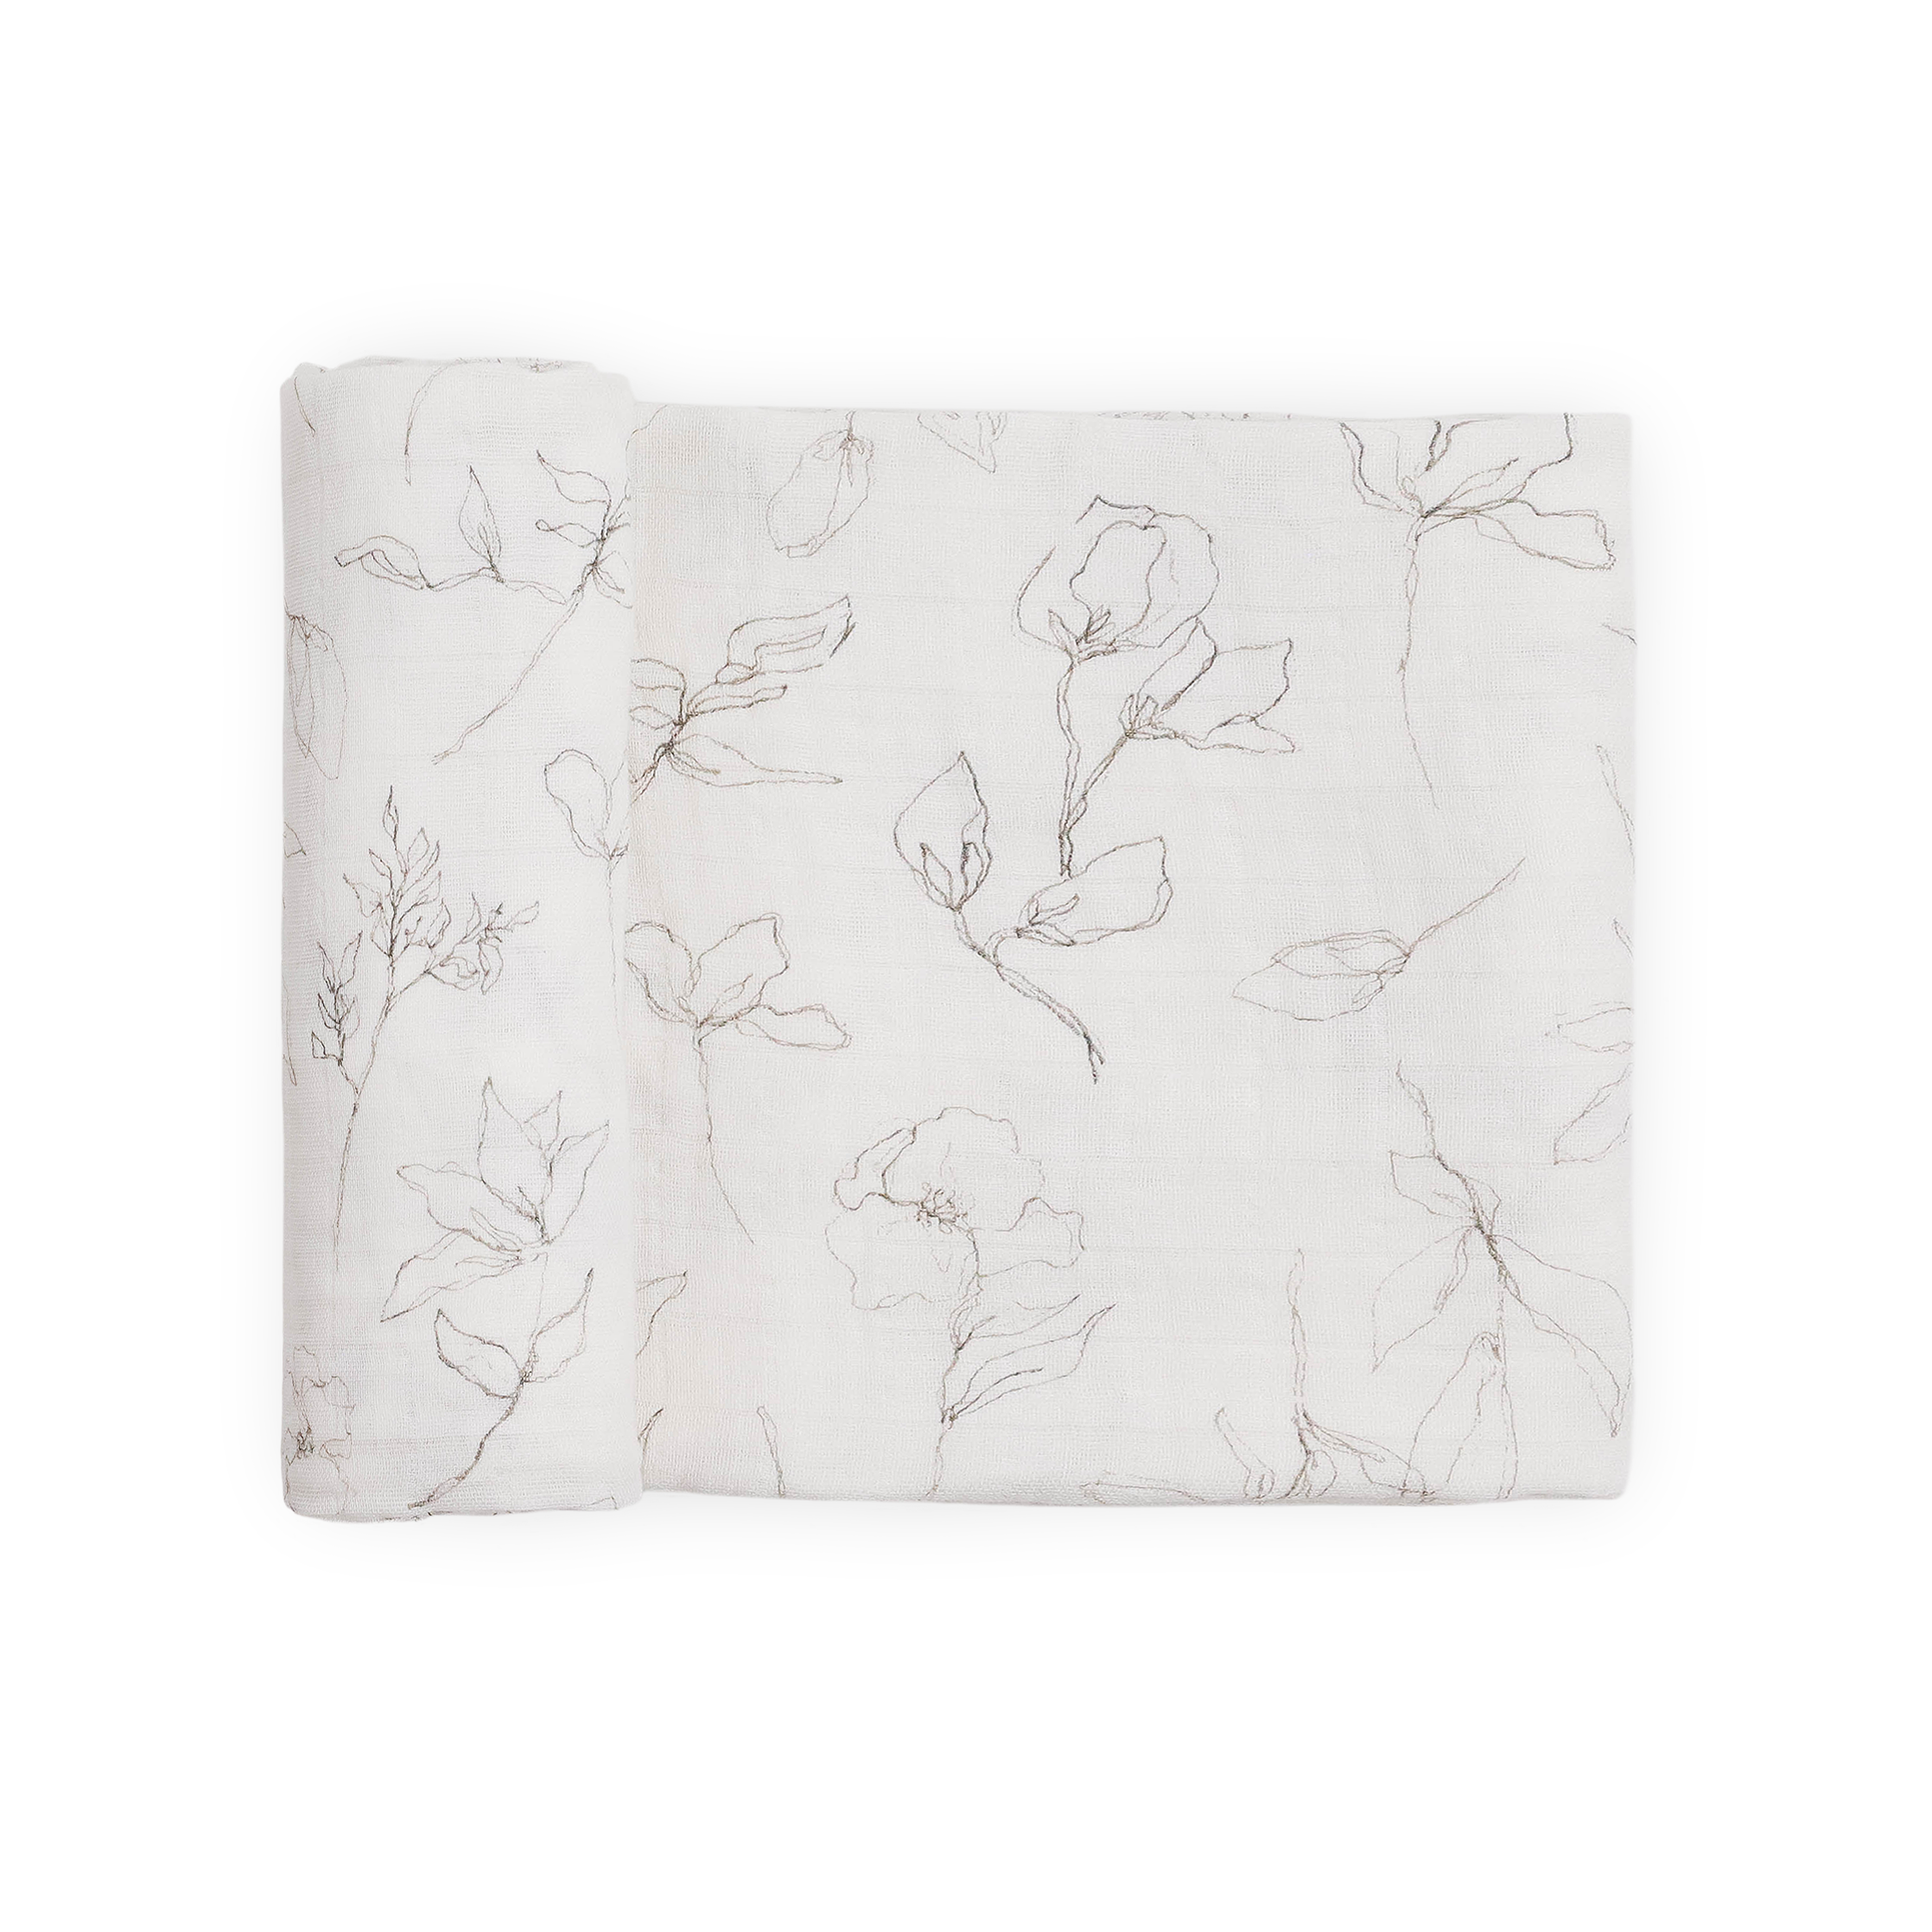 Organic Cotton Muslin Swaddle Blanket - Pencil Floral